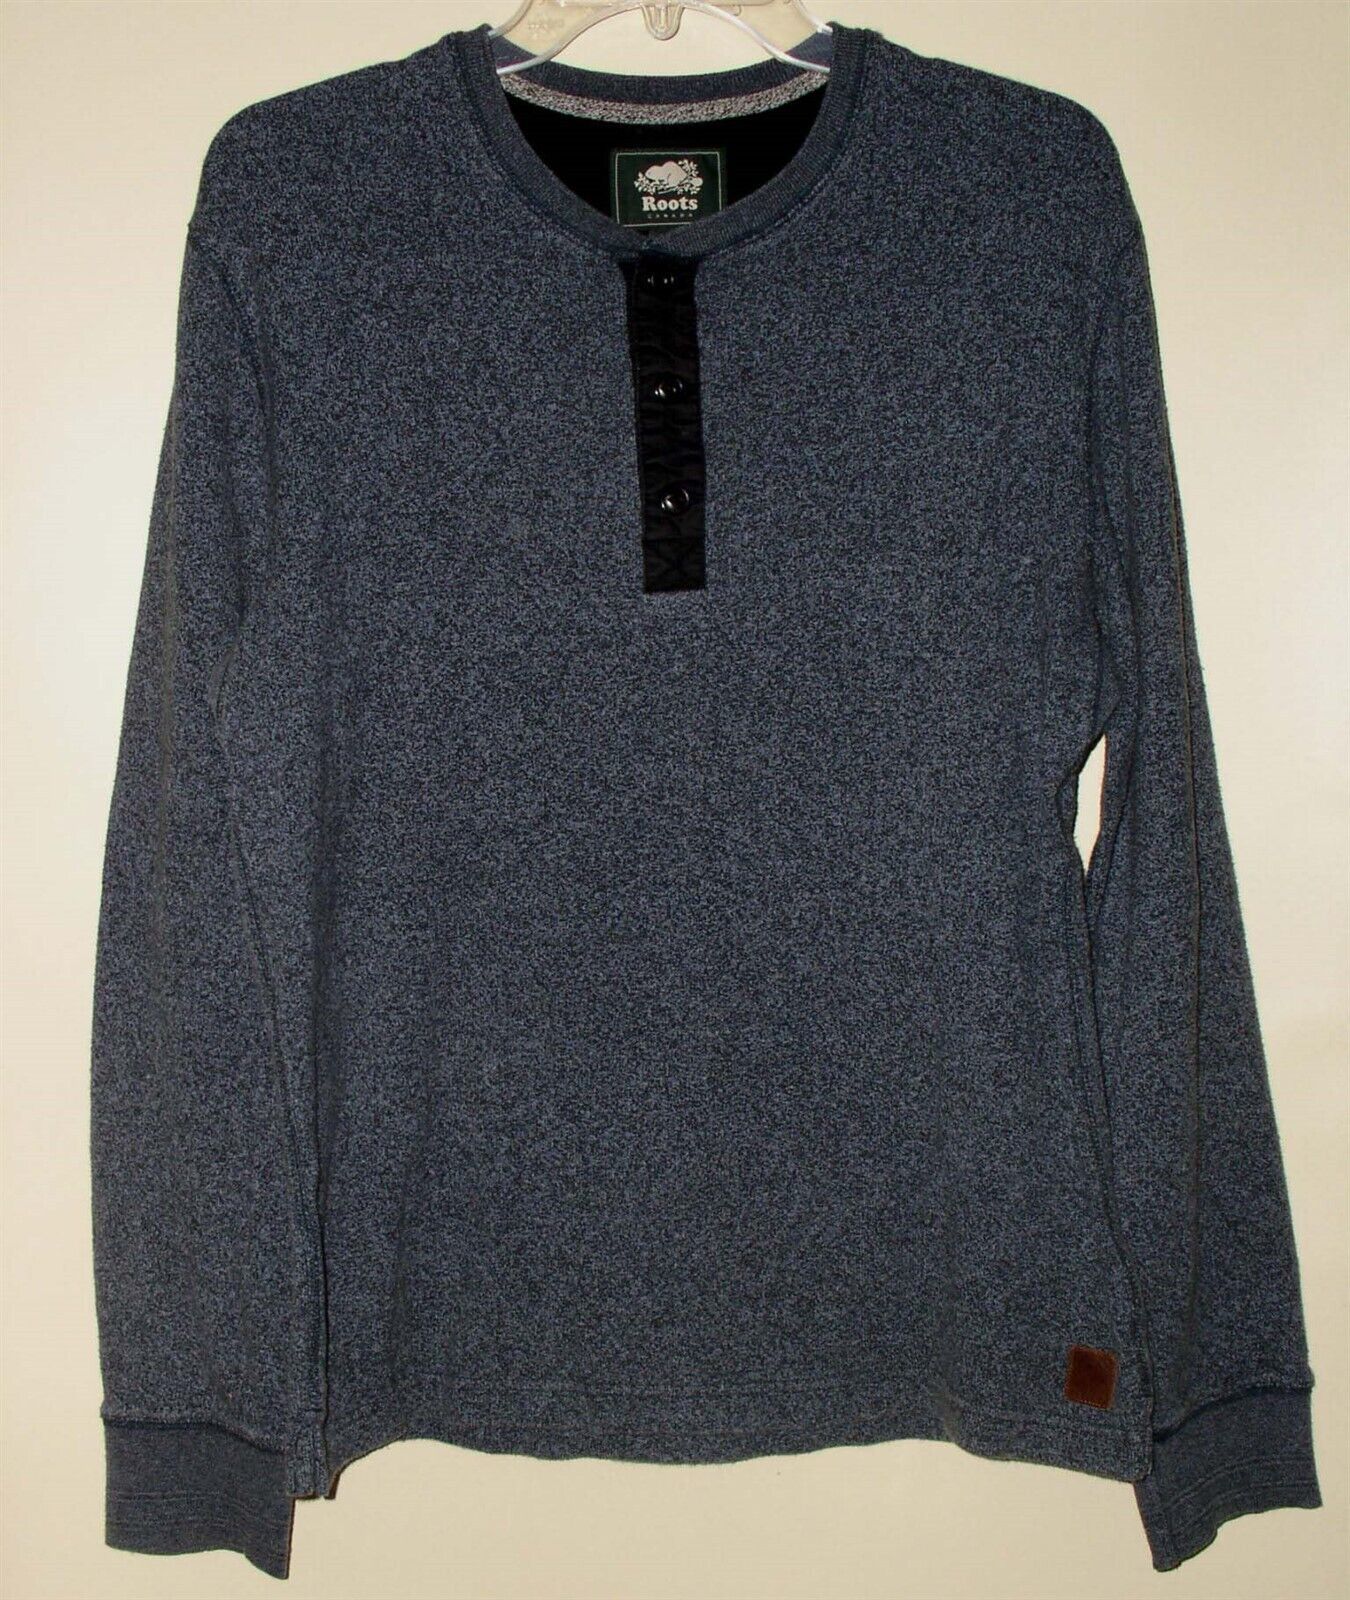 Primary image for Roots Canada Men's Long Sleeve Sweater Shirt Size Medium Charcoal